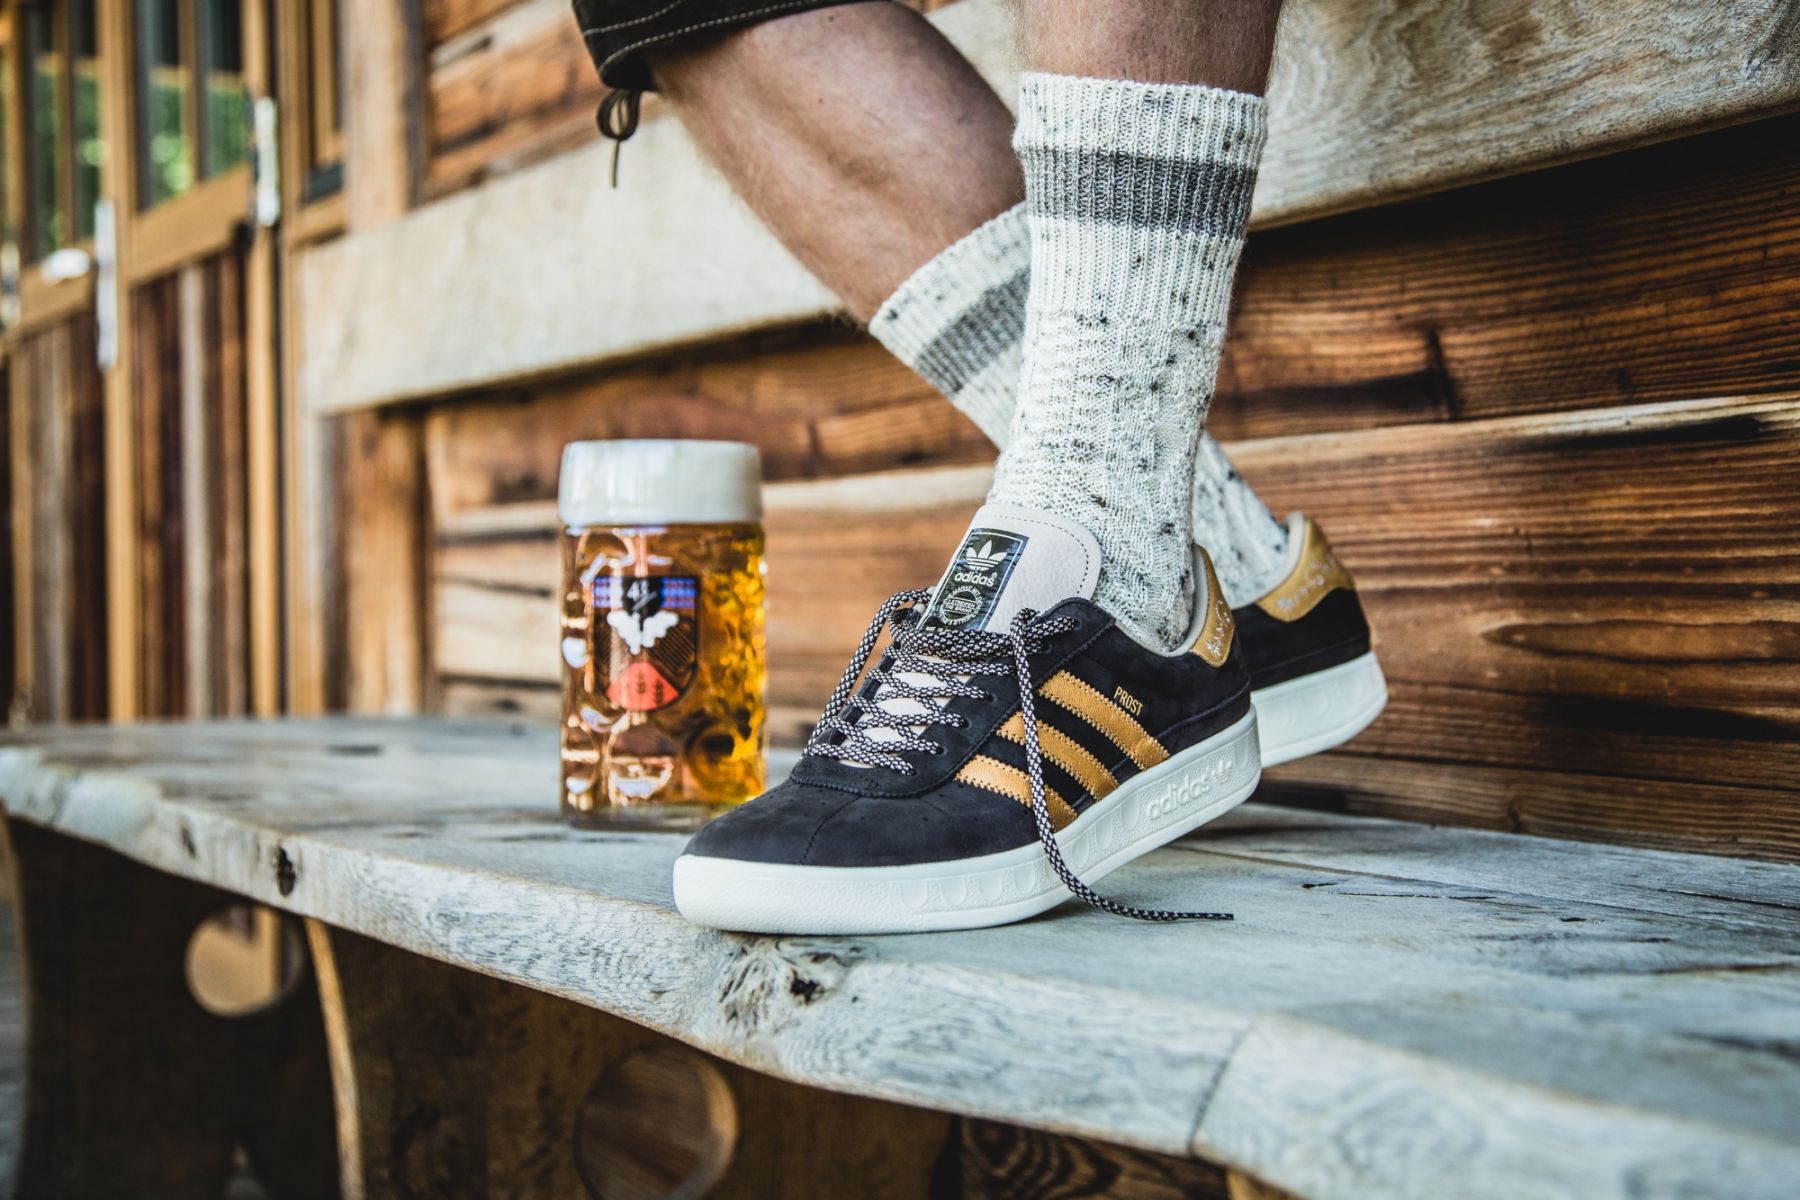 New Adidas Shoes made to repel beer and vomit during Oktoberfest – Adidas DPBR